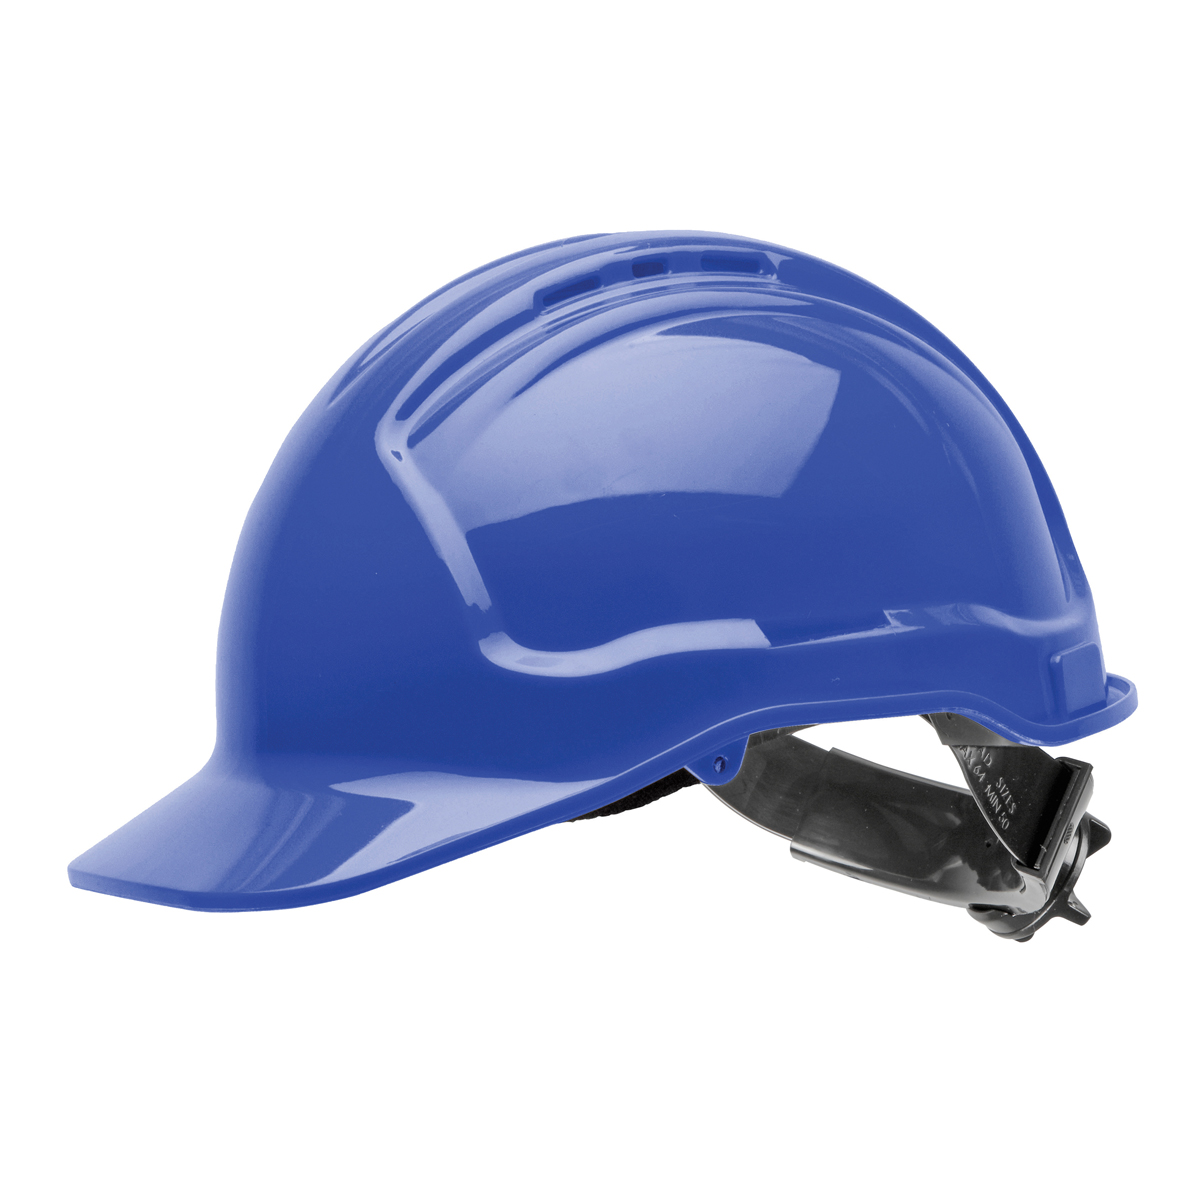 Personal Protective Equipment PPE